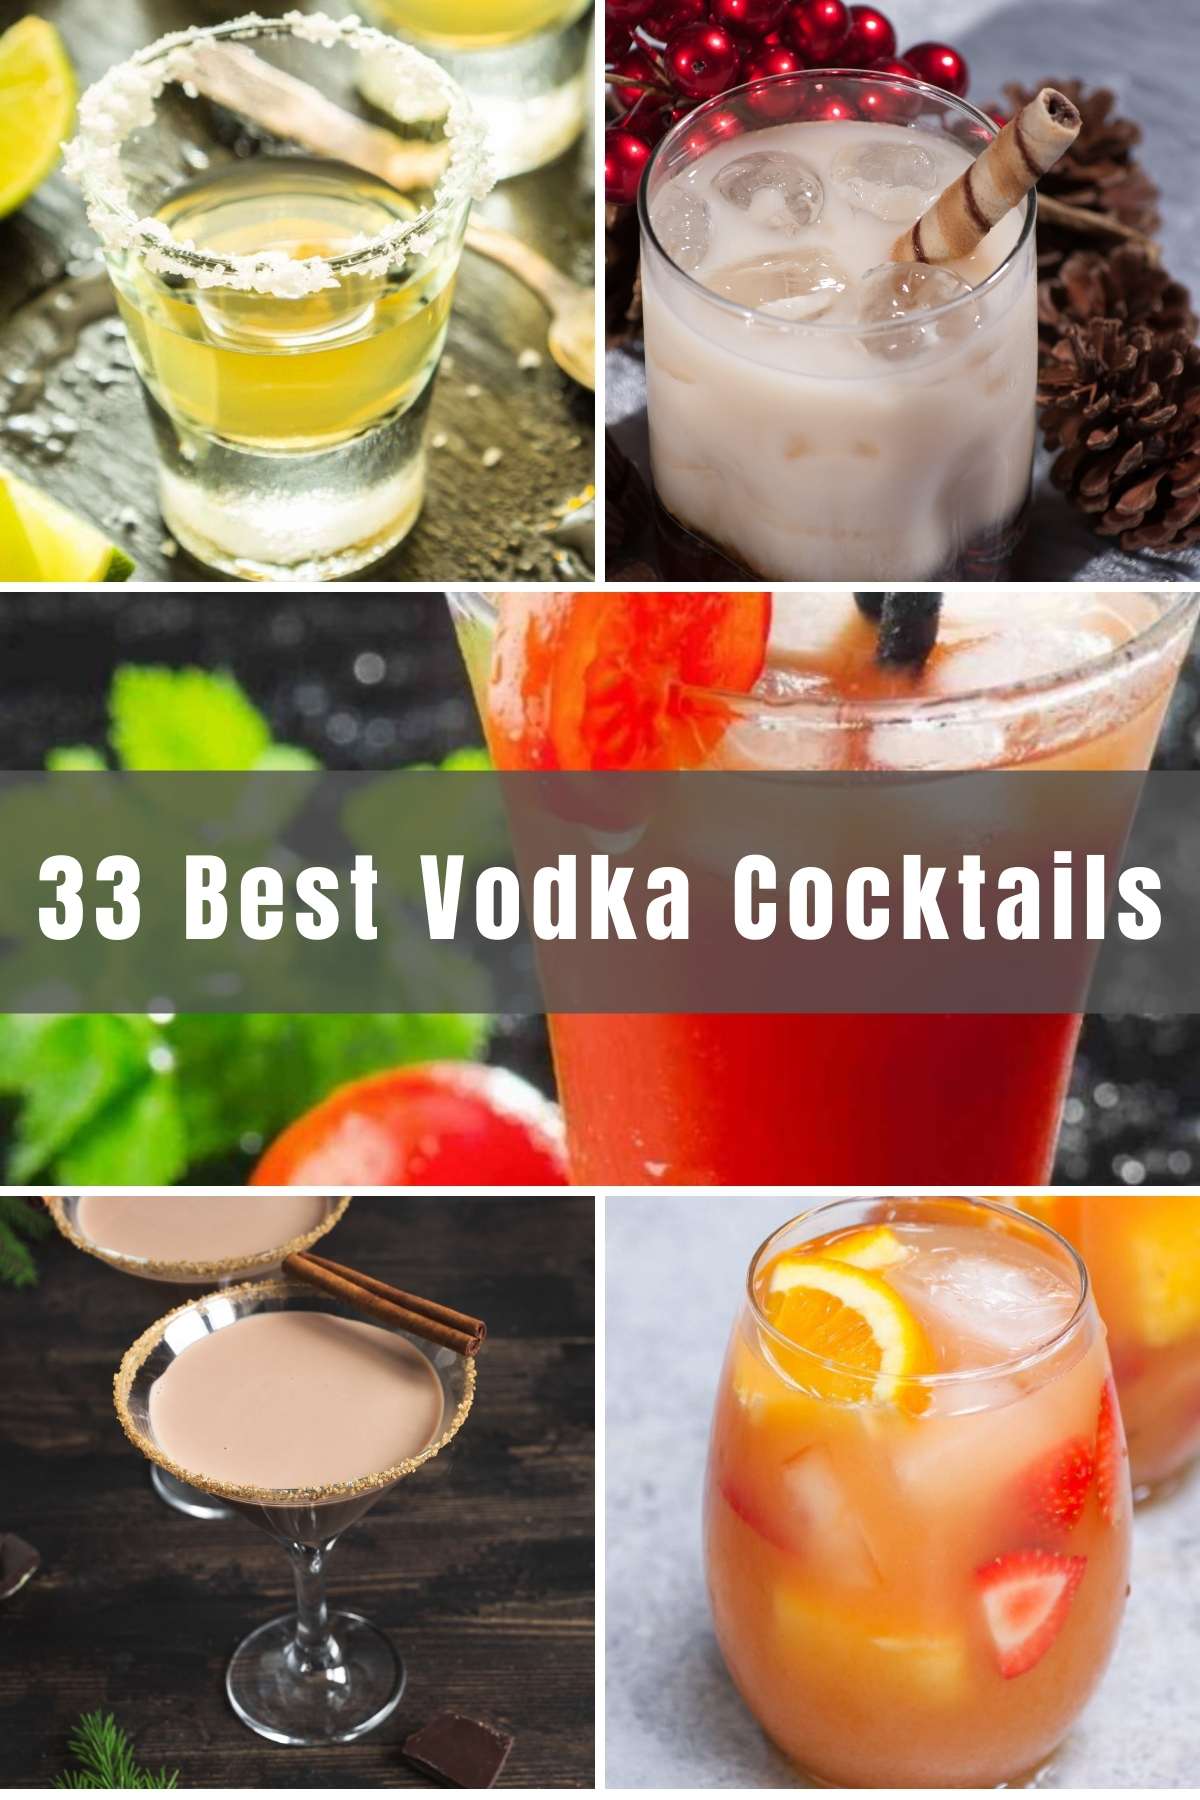 Vodka is an ingredient in renowned drinks like the Cosmopolitan, Long Island Iced Tea and Sex on the Beach. With this comprehensive roundup of the very best Vodka Cocktails, you’ll be a vodka connoisseur in no time!